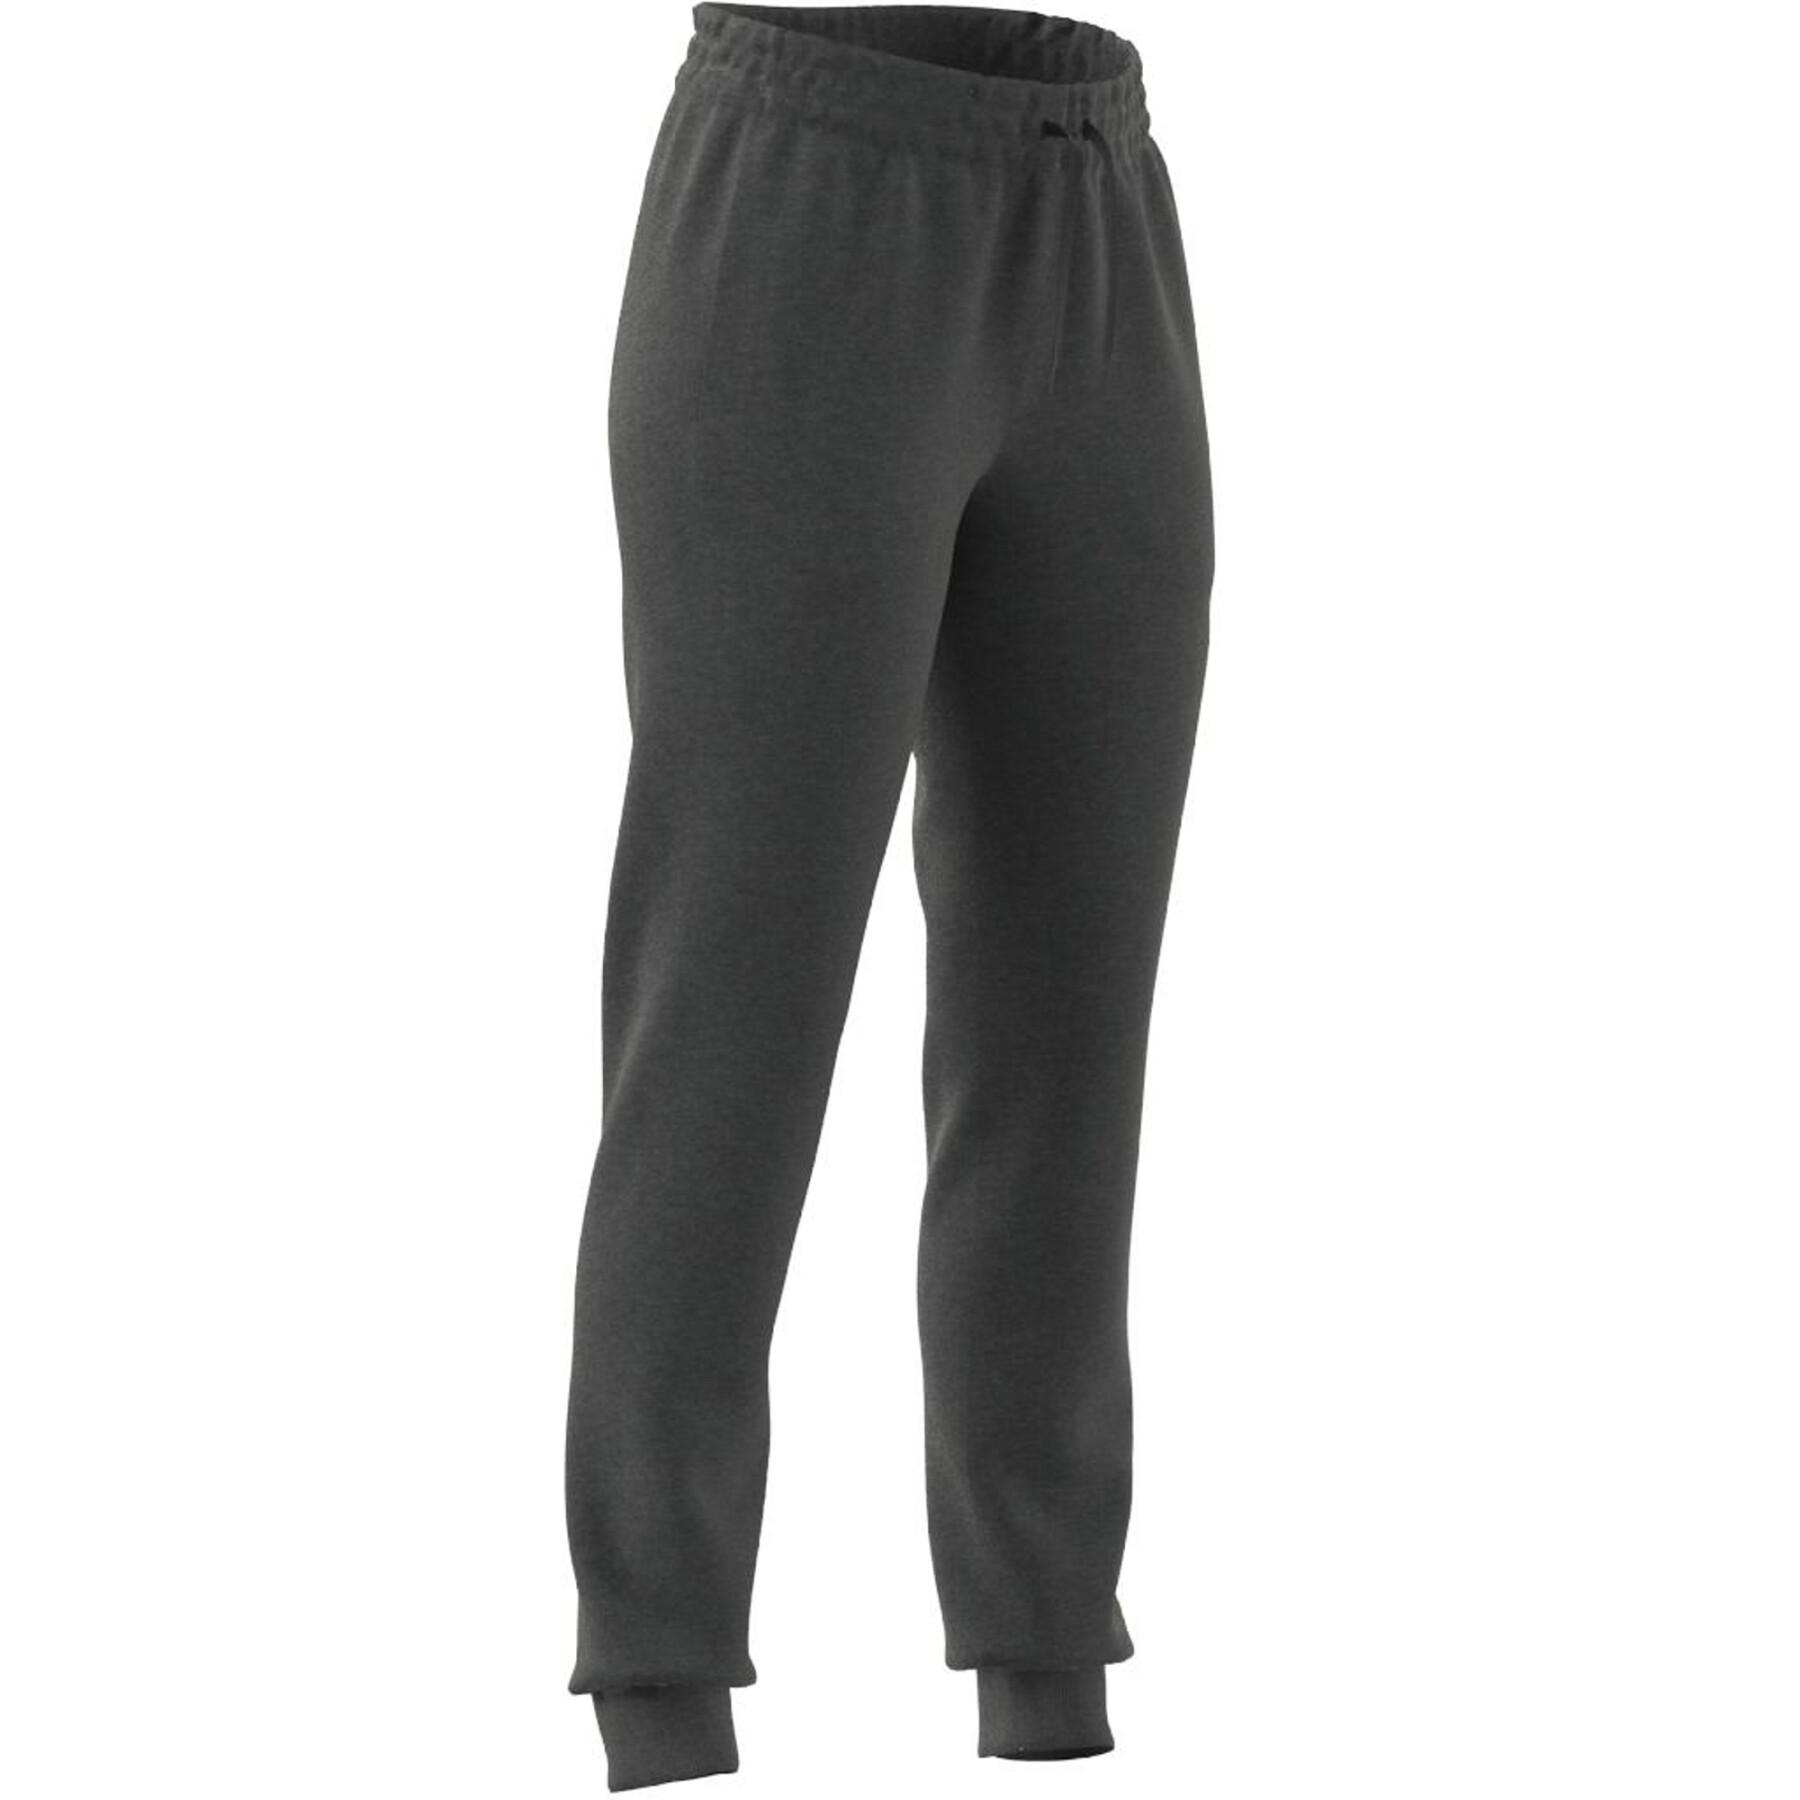 Women's trousers adidas Essentials French Terry Logo